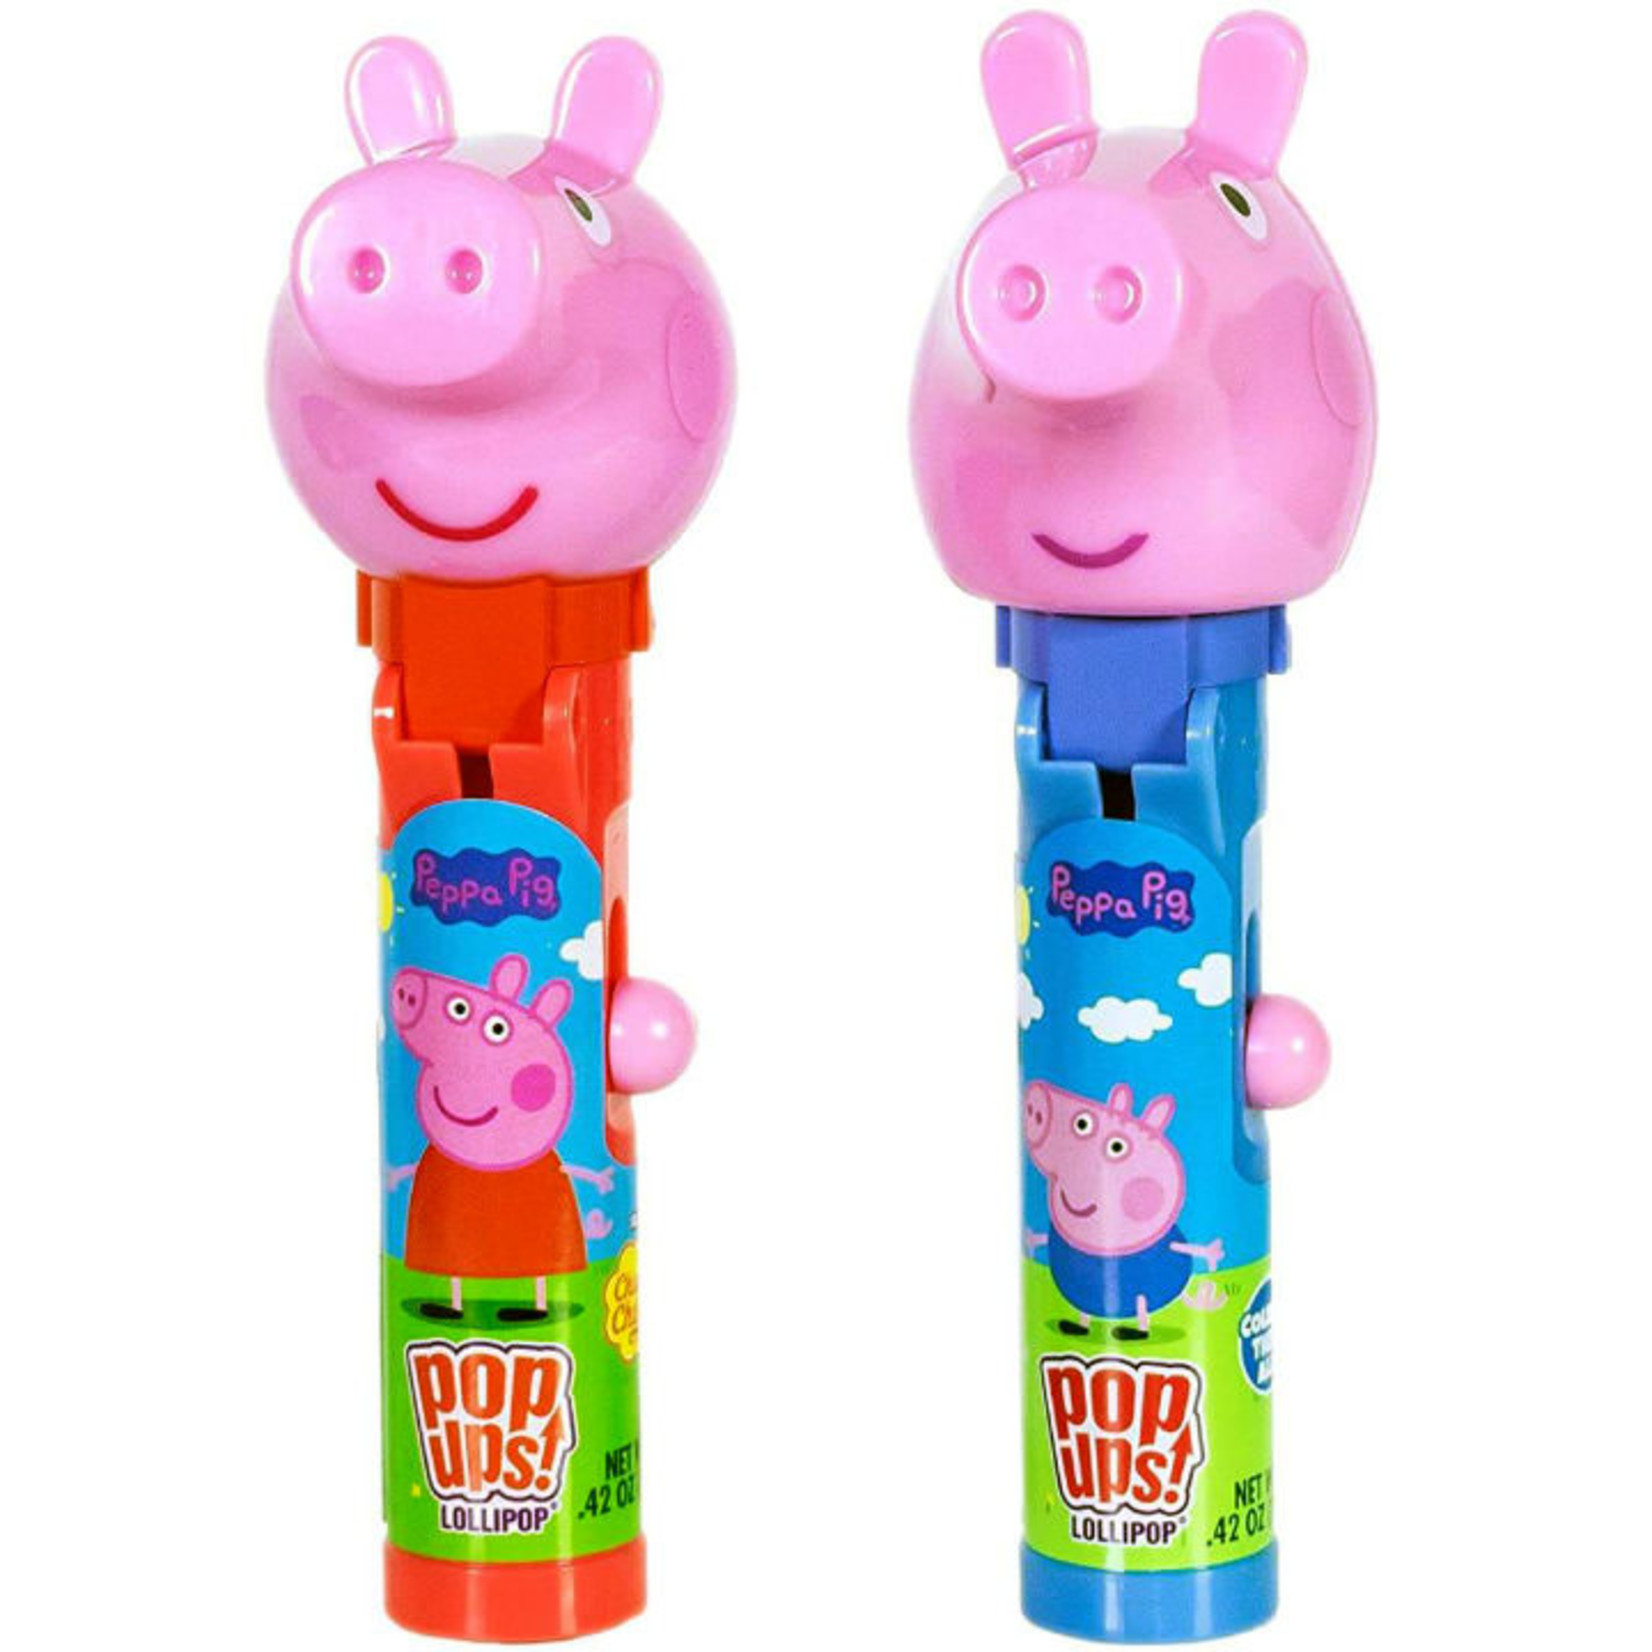 Candy Bip Peppa Pig Lolly Pop Up